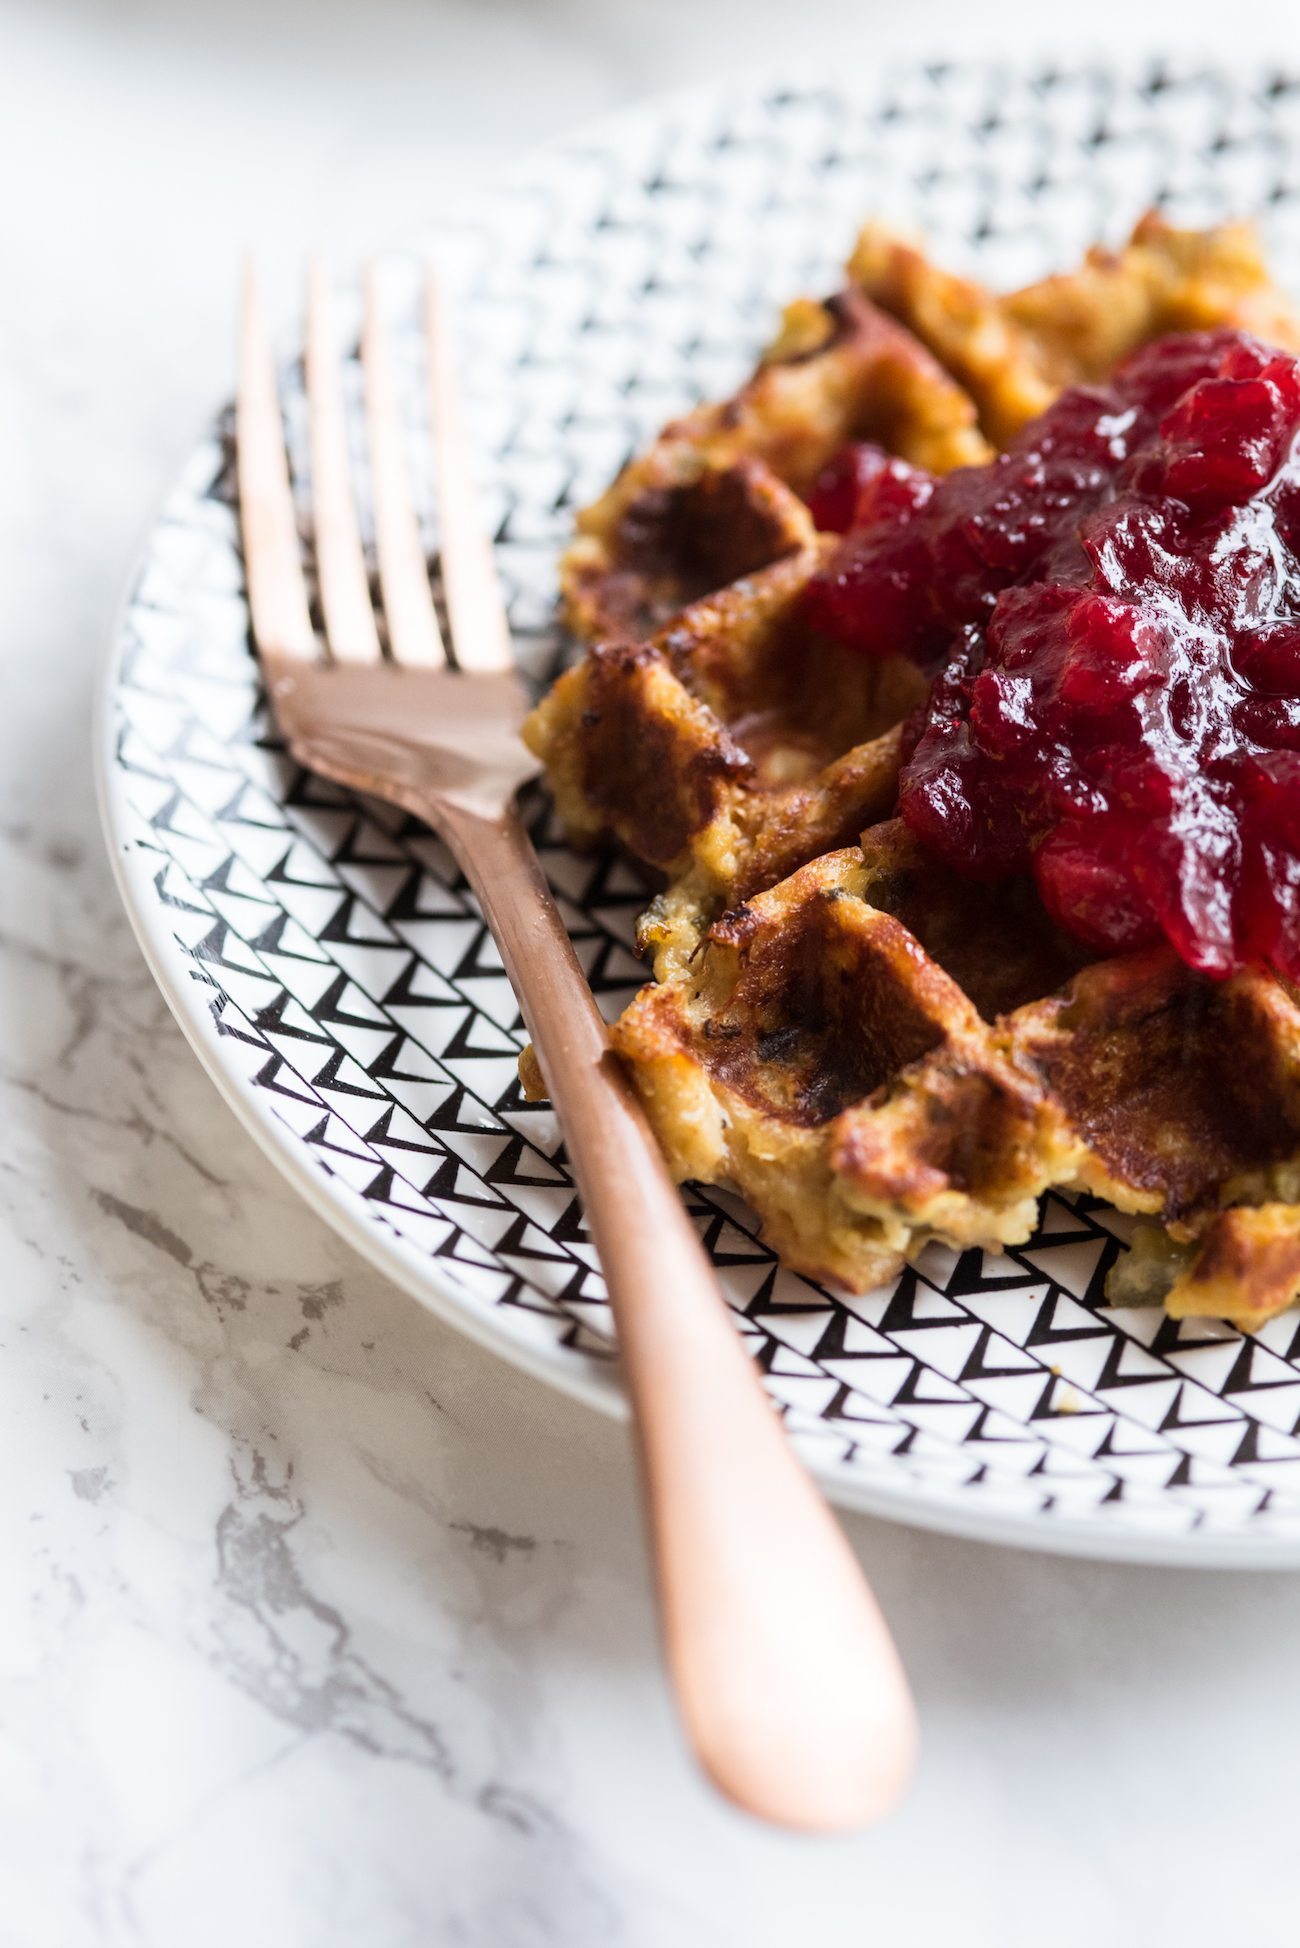 Leftover Stuffing Waffles Recipes | What to do with leftover stuffing, entertaining tips, party ideas, holiday party ideas and more from @cydconverse